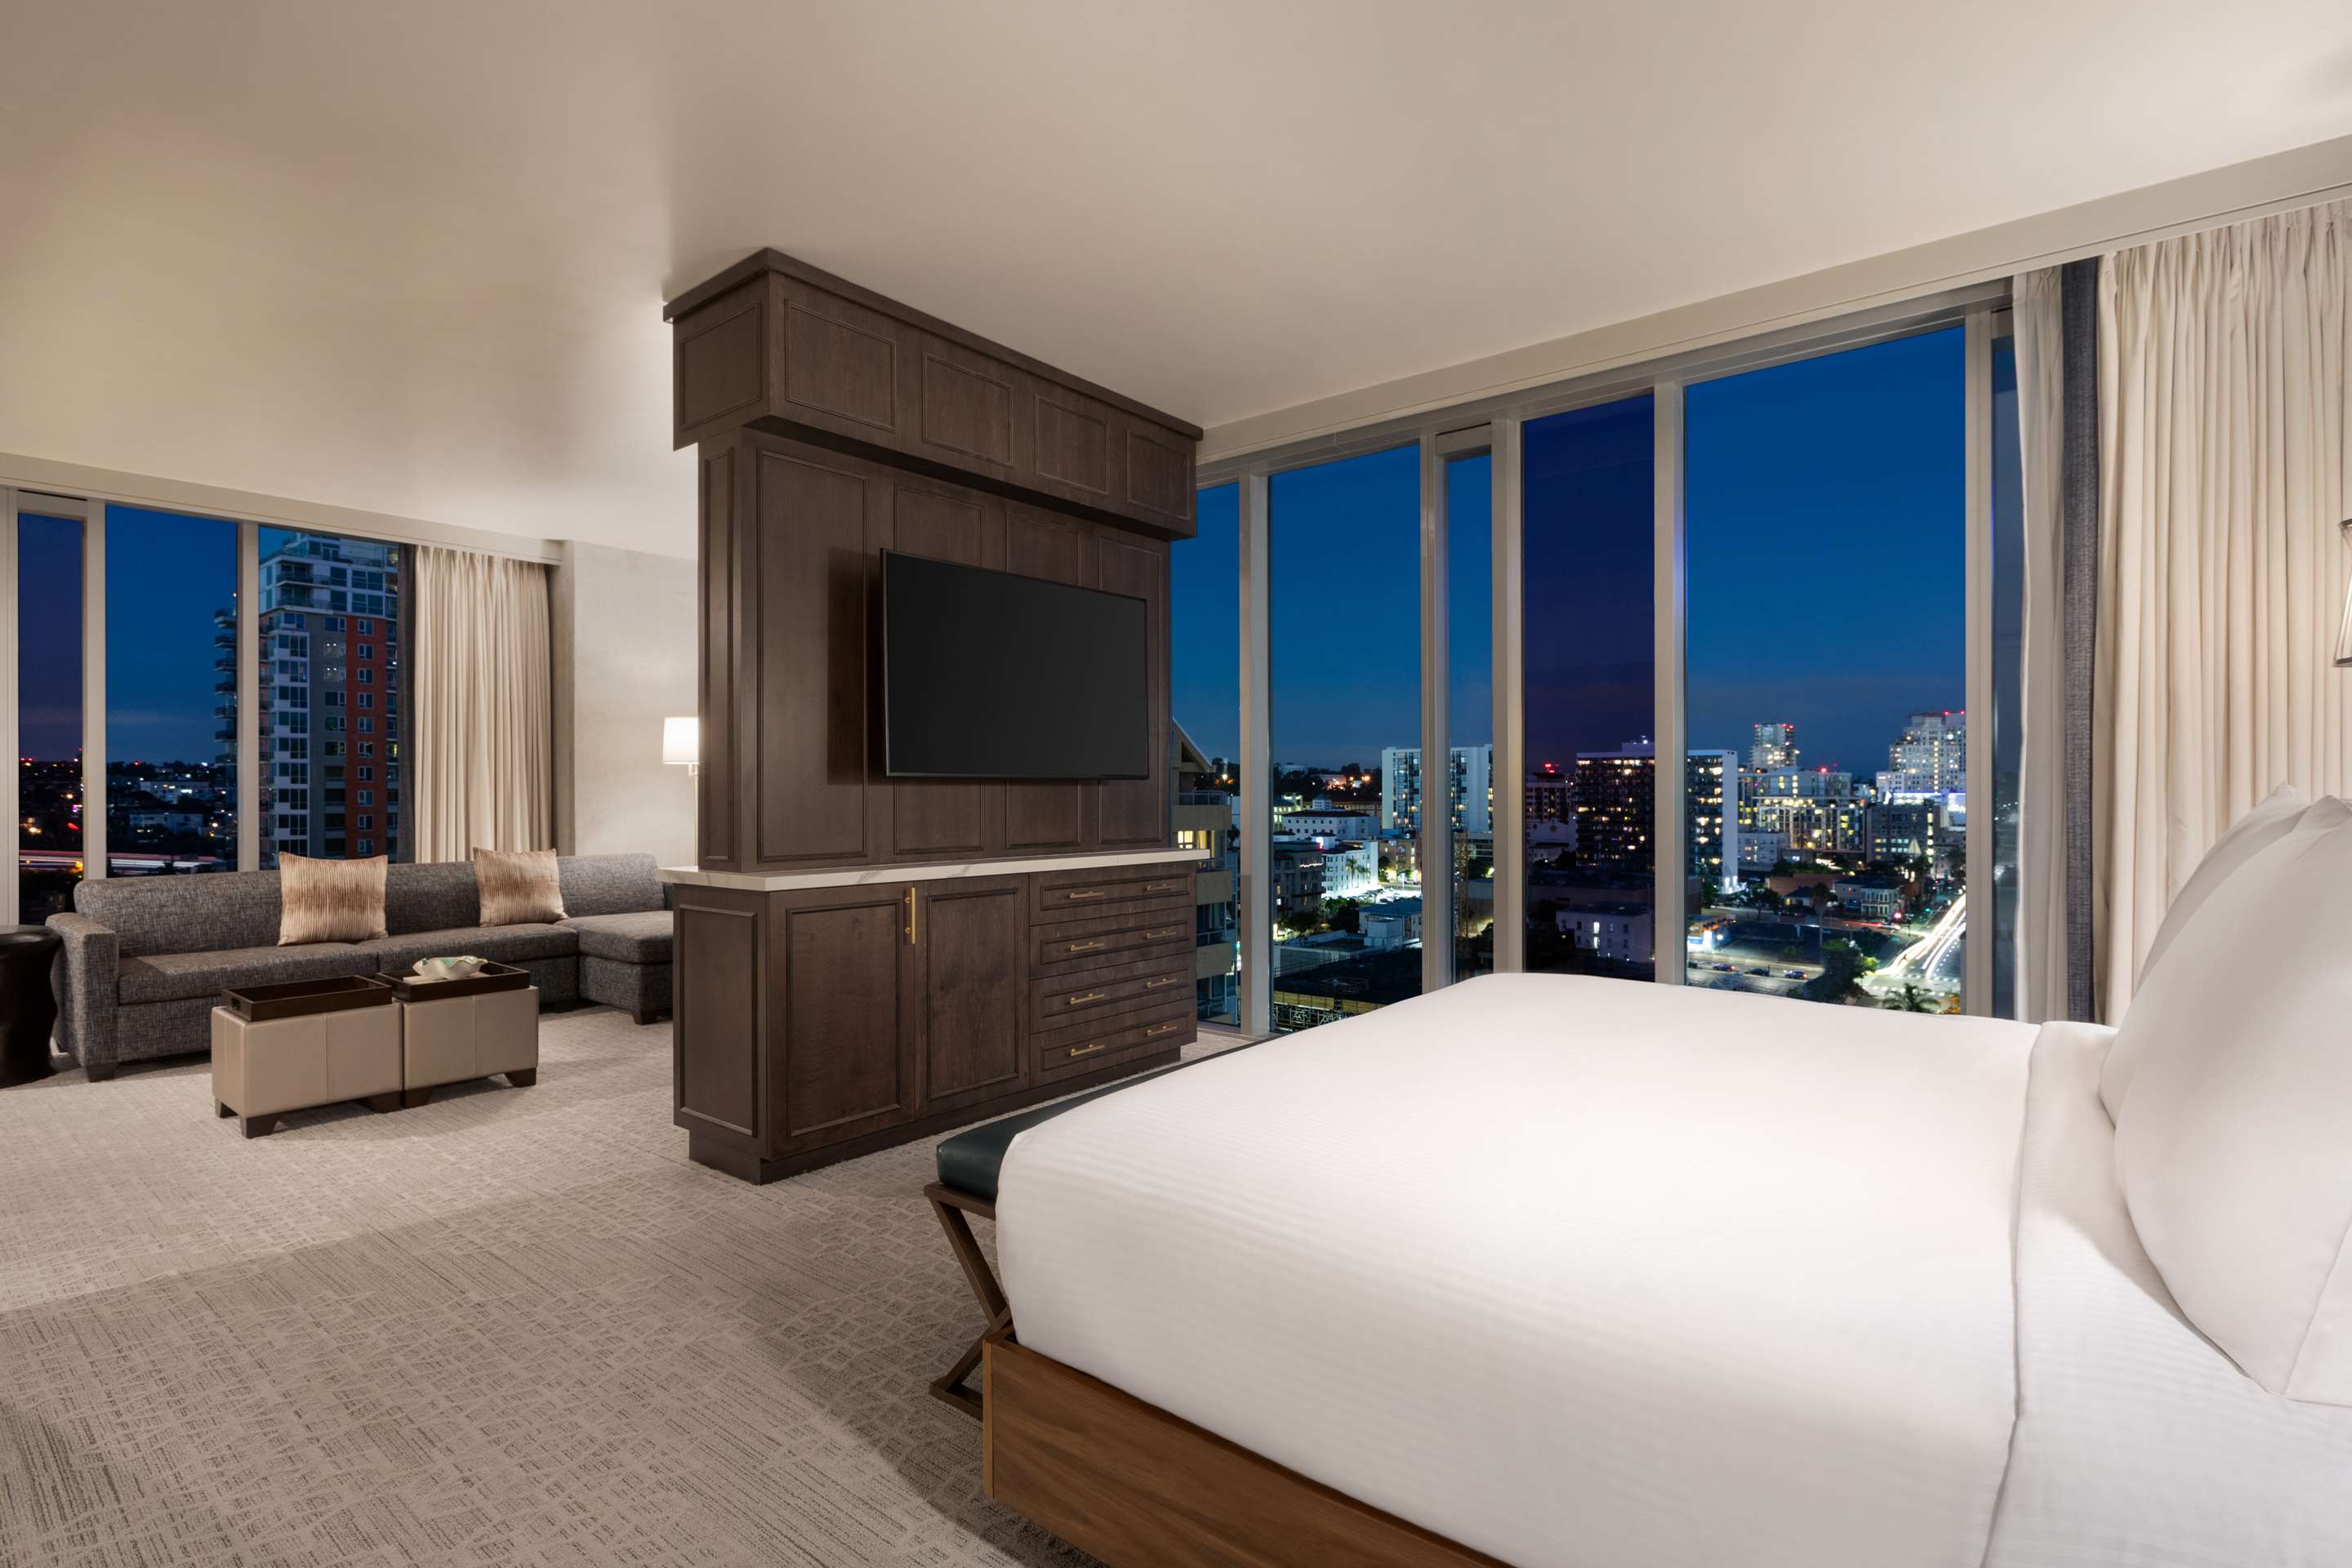 Score Grandpa get Carte Hotel San Diego Downtown, Curio Collection by Hilton-San Diego  Updated 2022 Room Price-Reviews & Deals | Trip.com